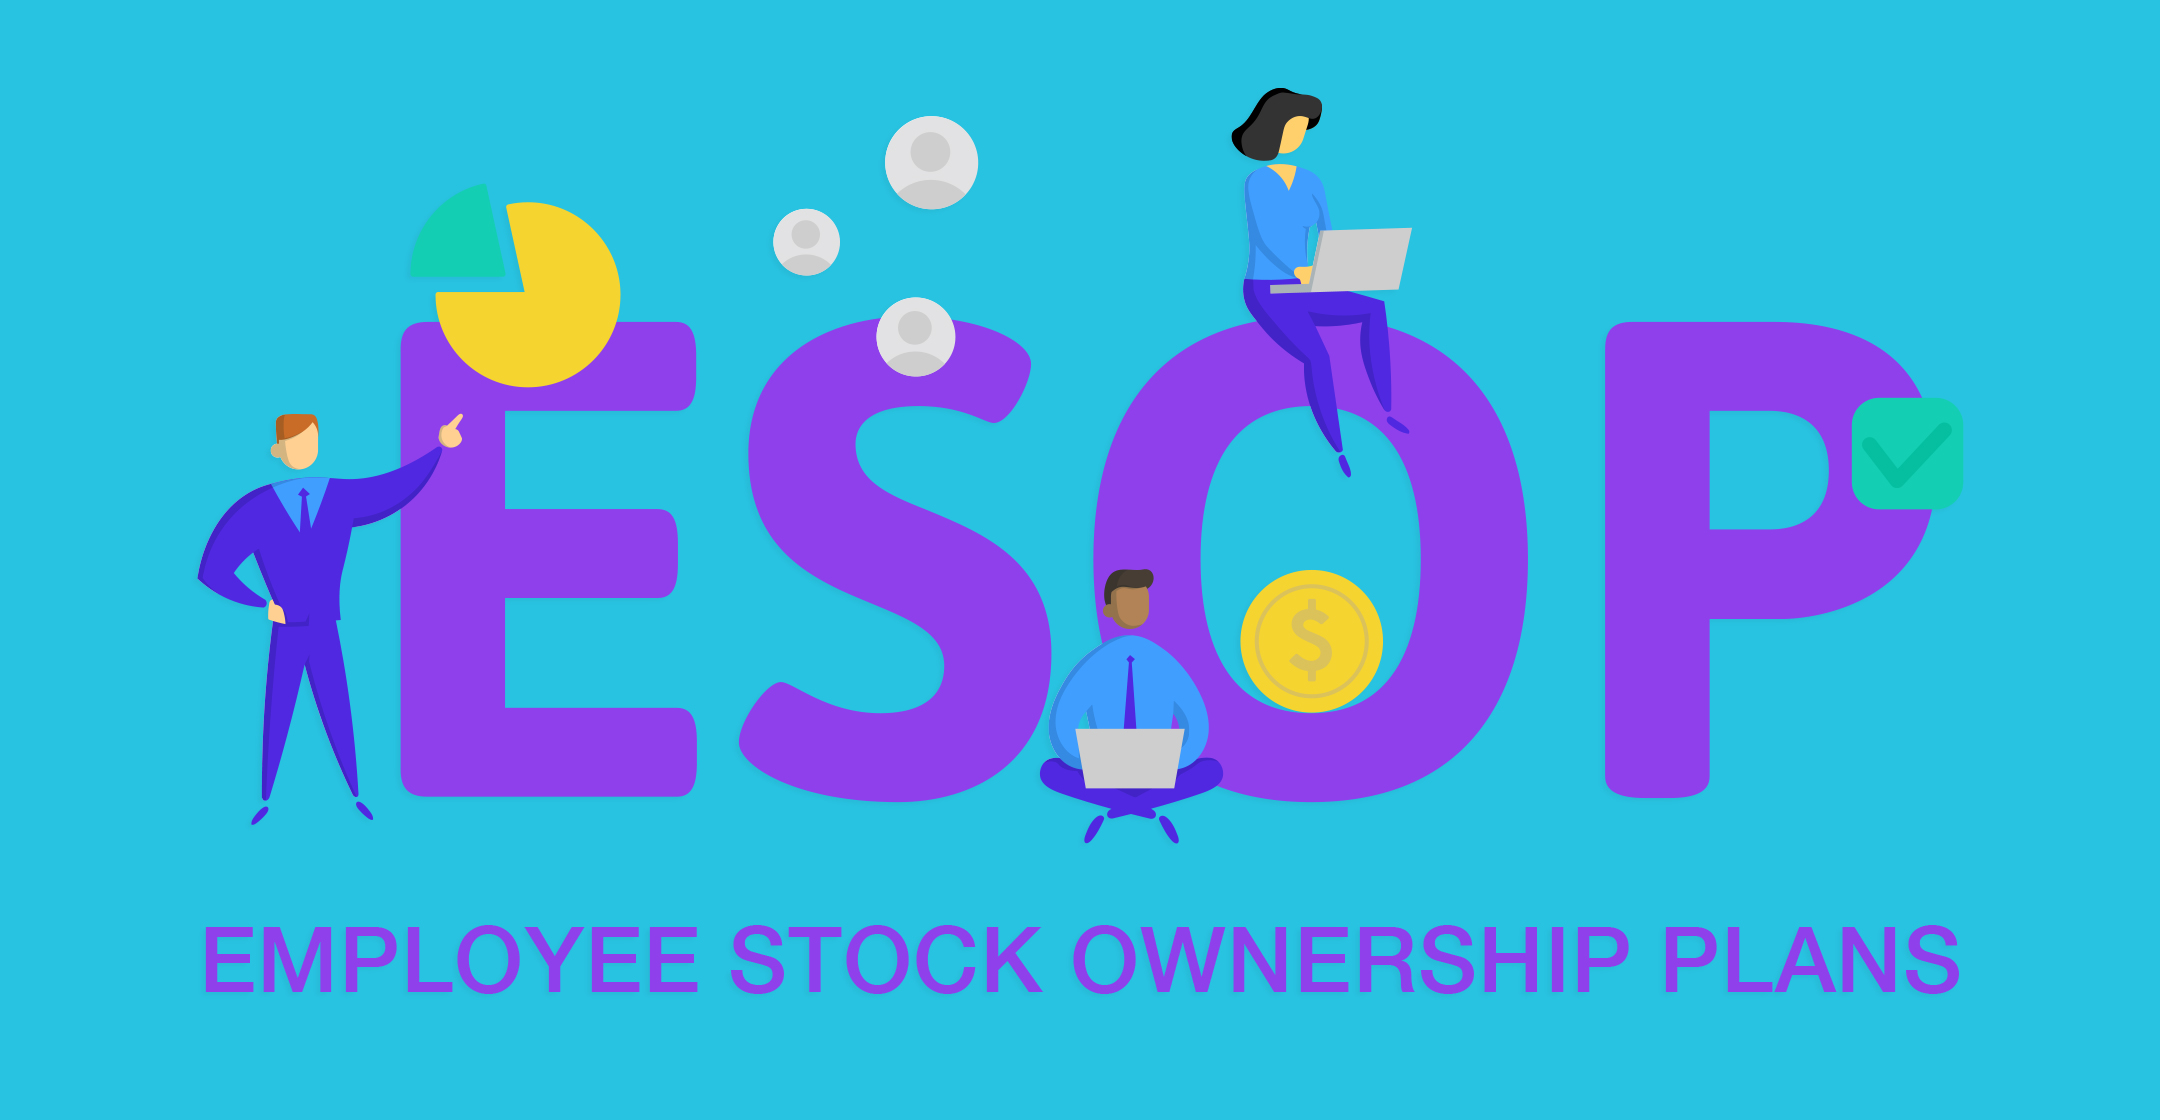 What Is an ESOP and How Does an ESOP Work?